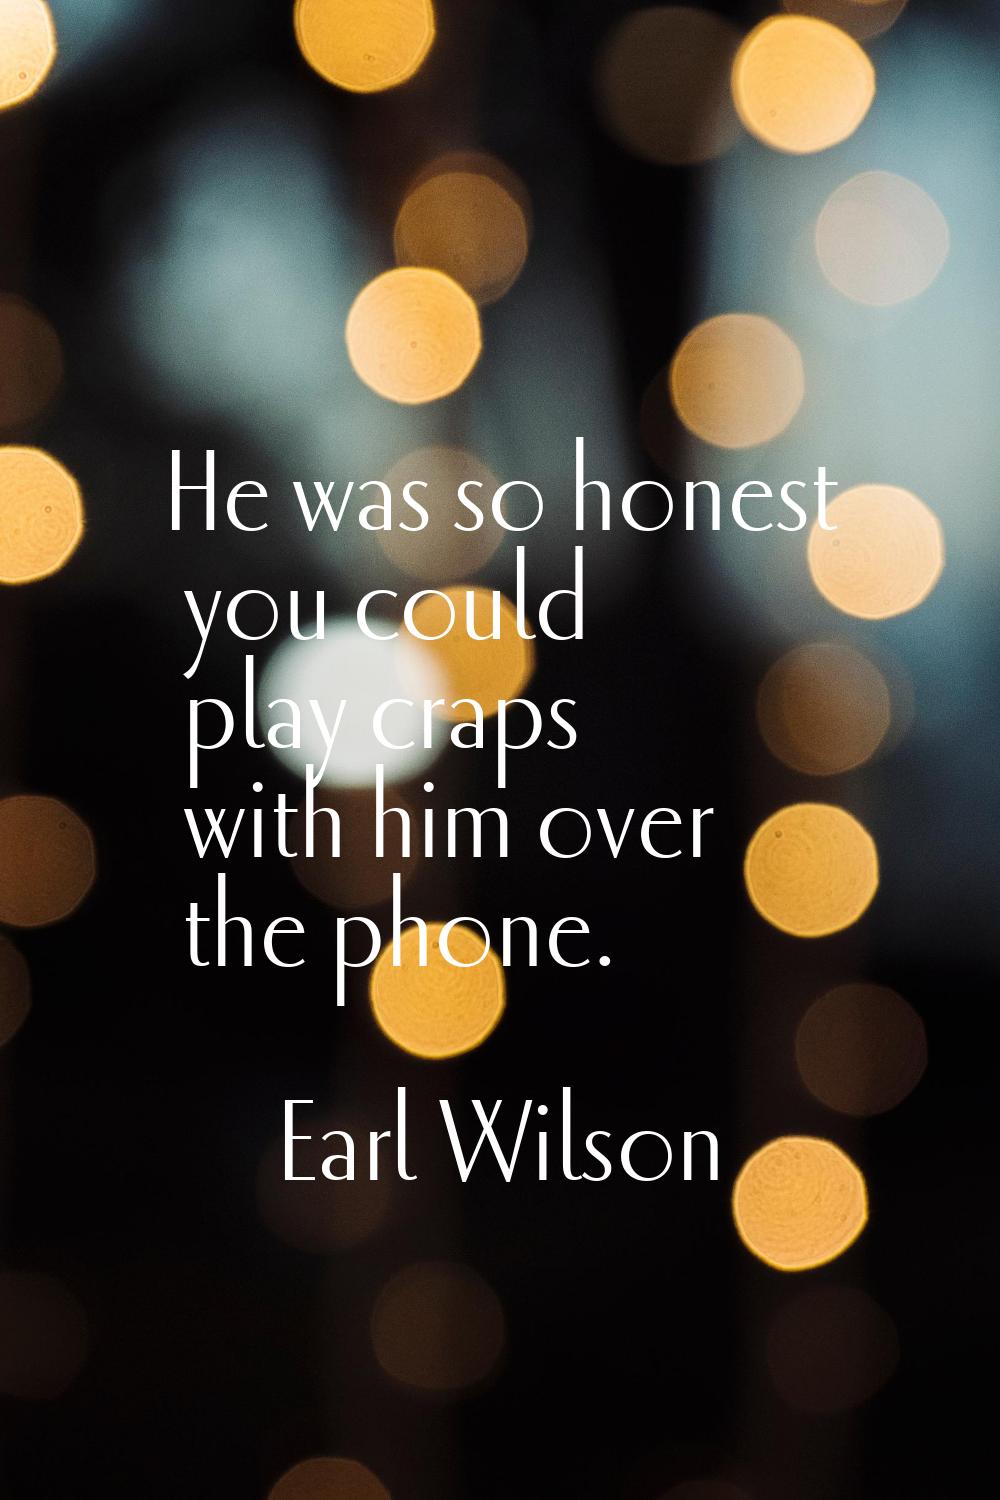 He was so honest you could play craps with him over the phone.